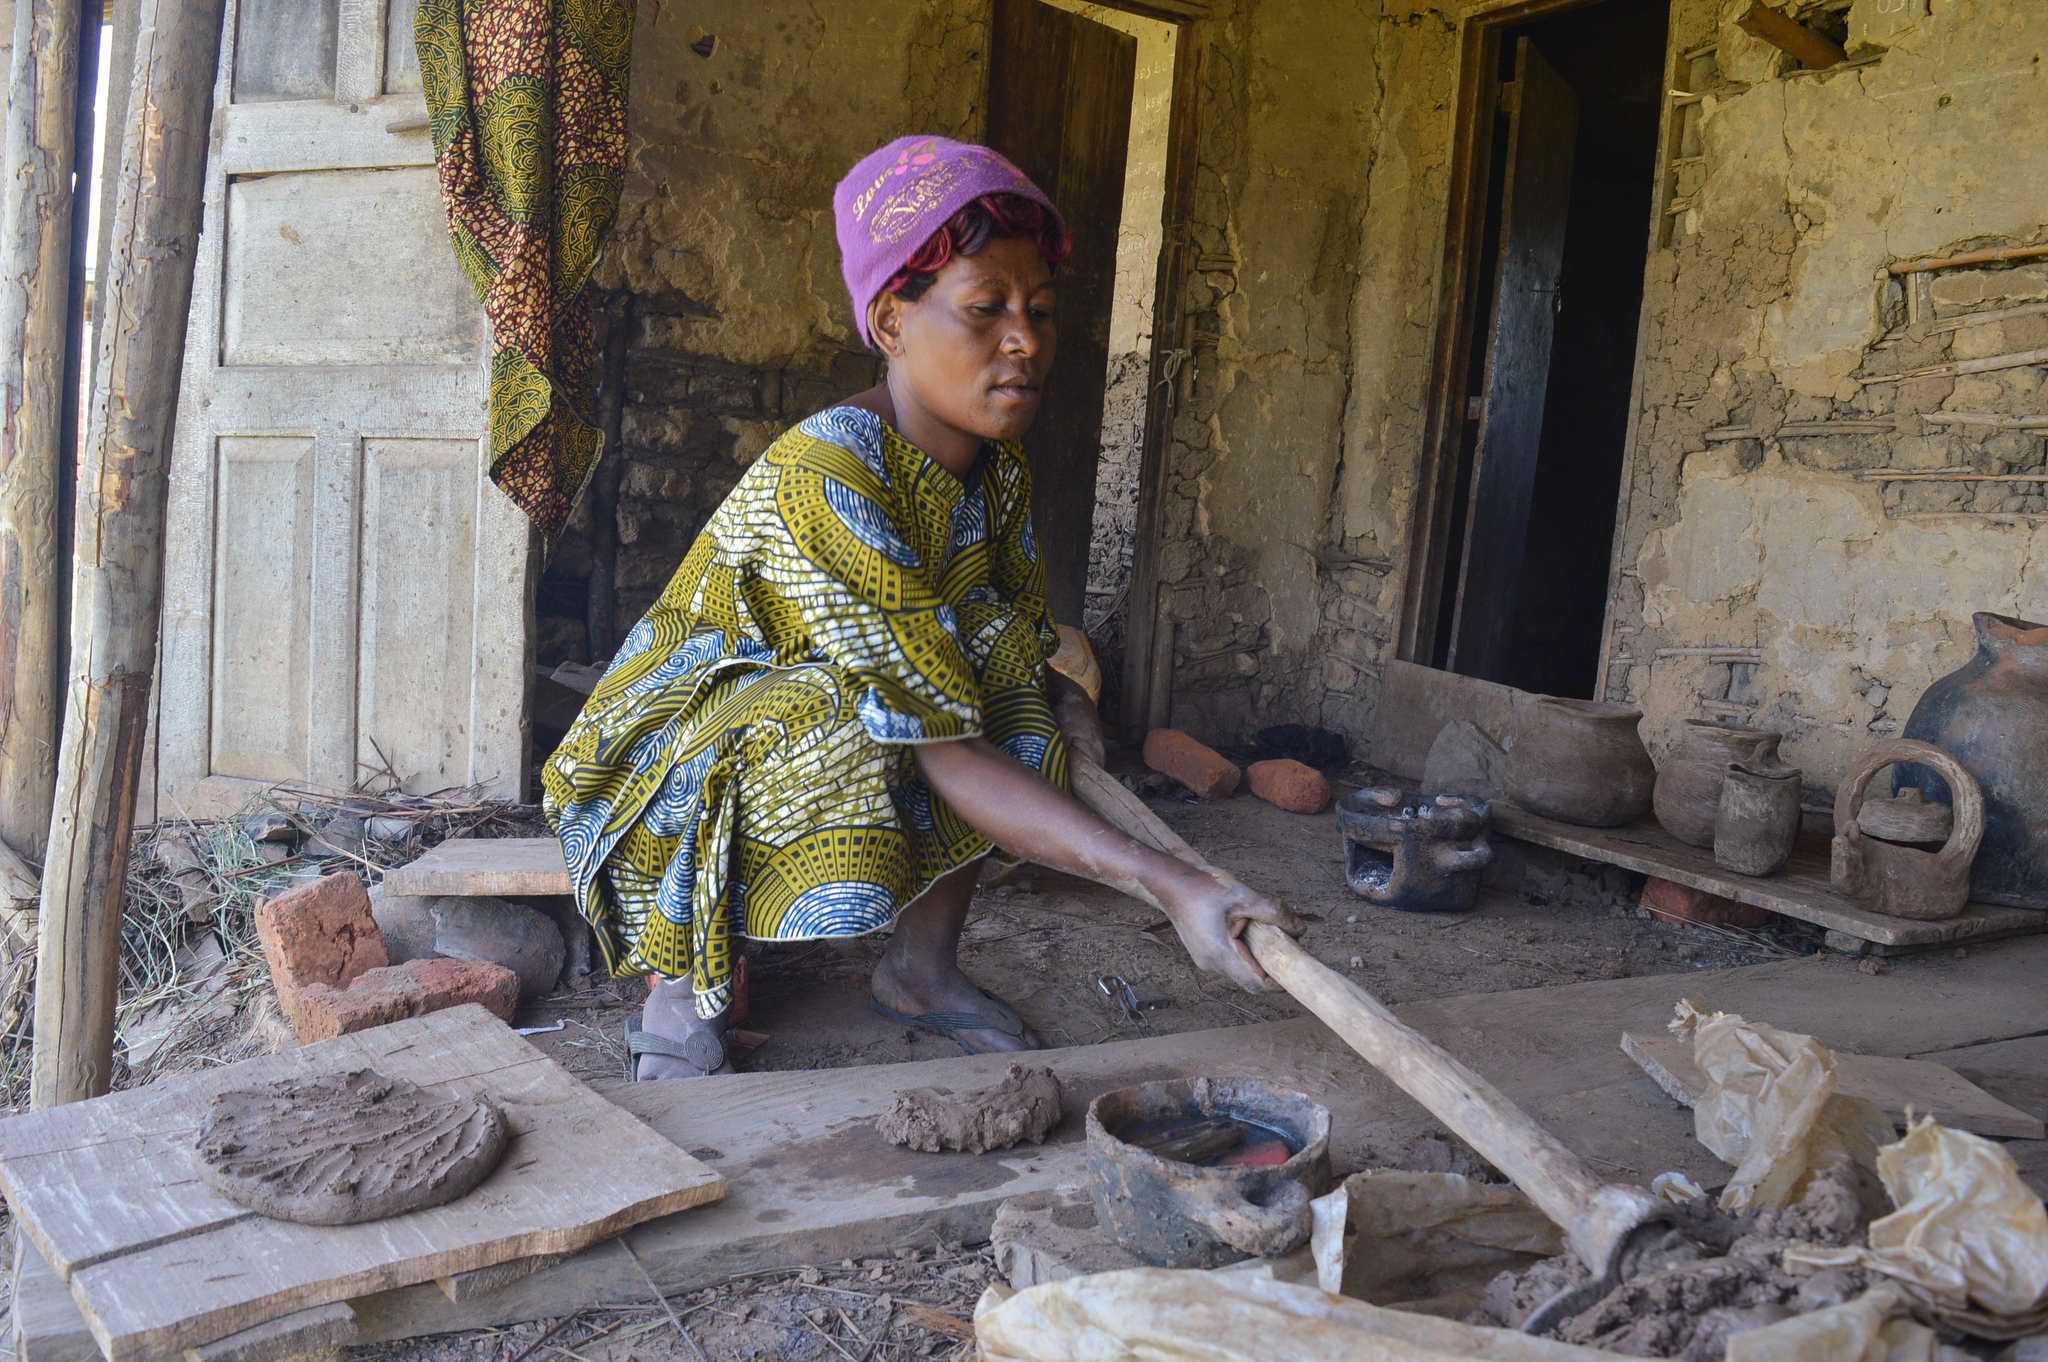 Forced to Flee Violence, Potter Takes Refuge in Clay